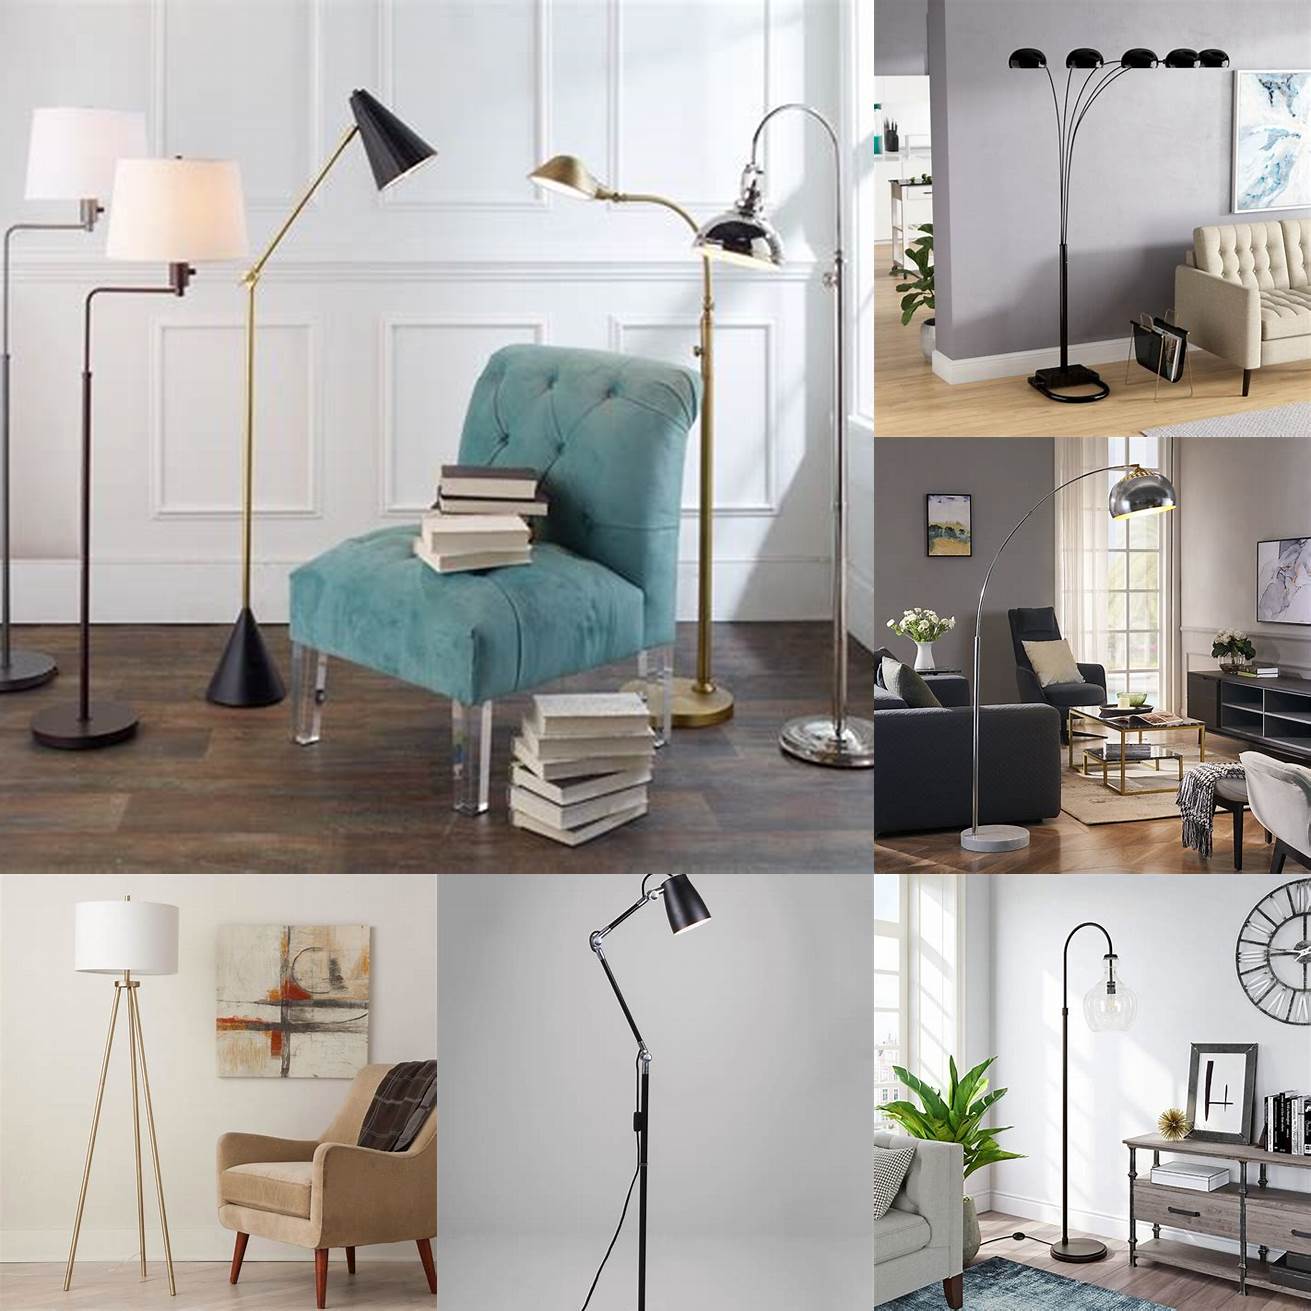 Floor lamps are a versatile lighting option that can be used in any room